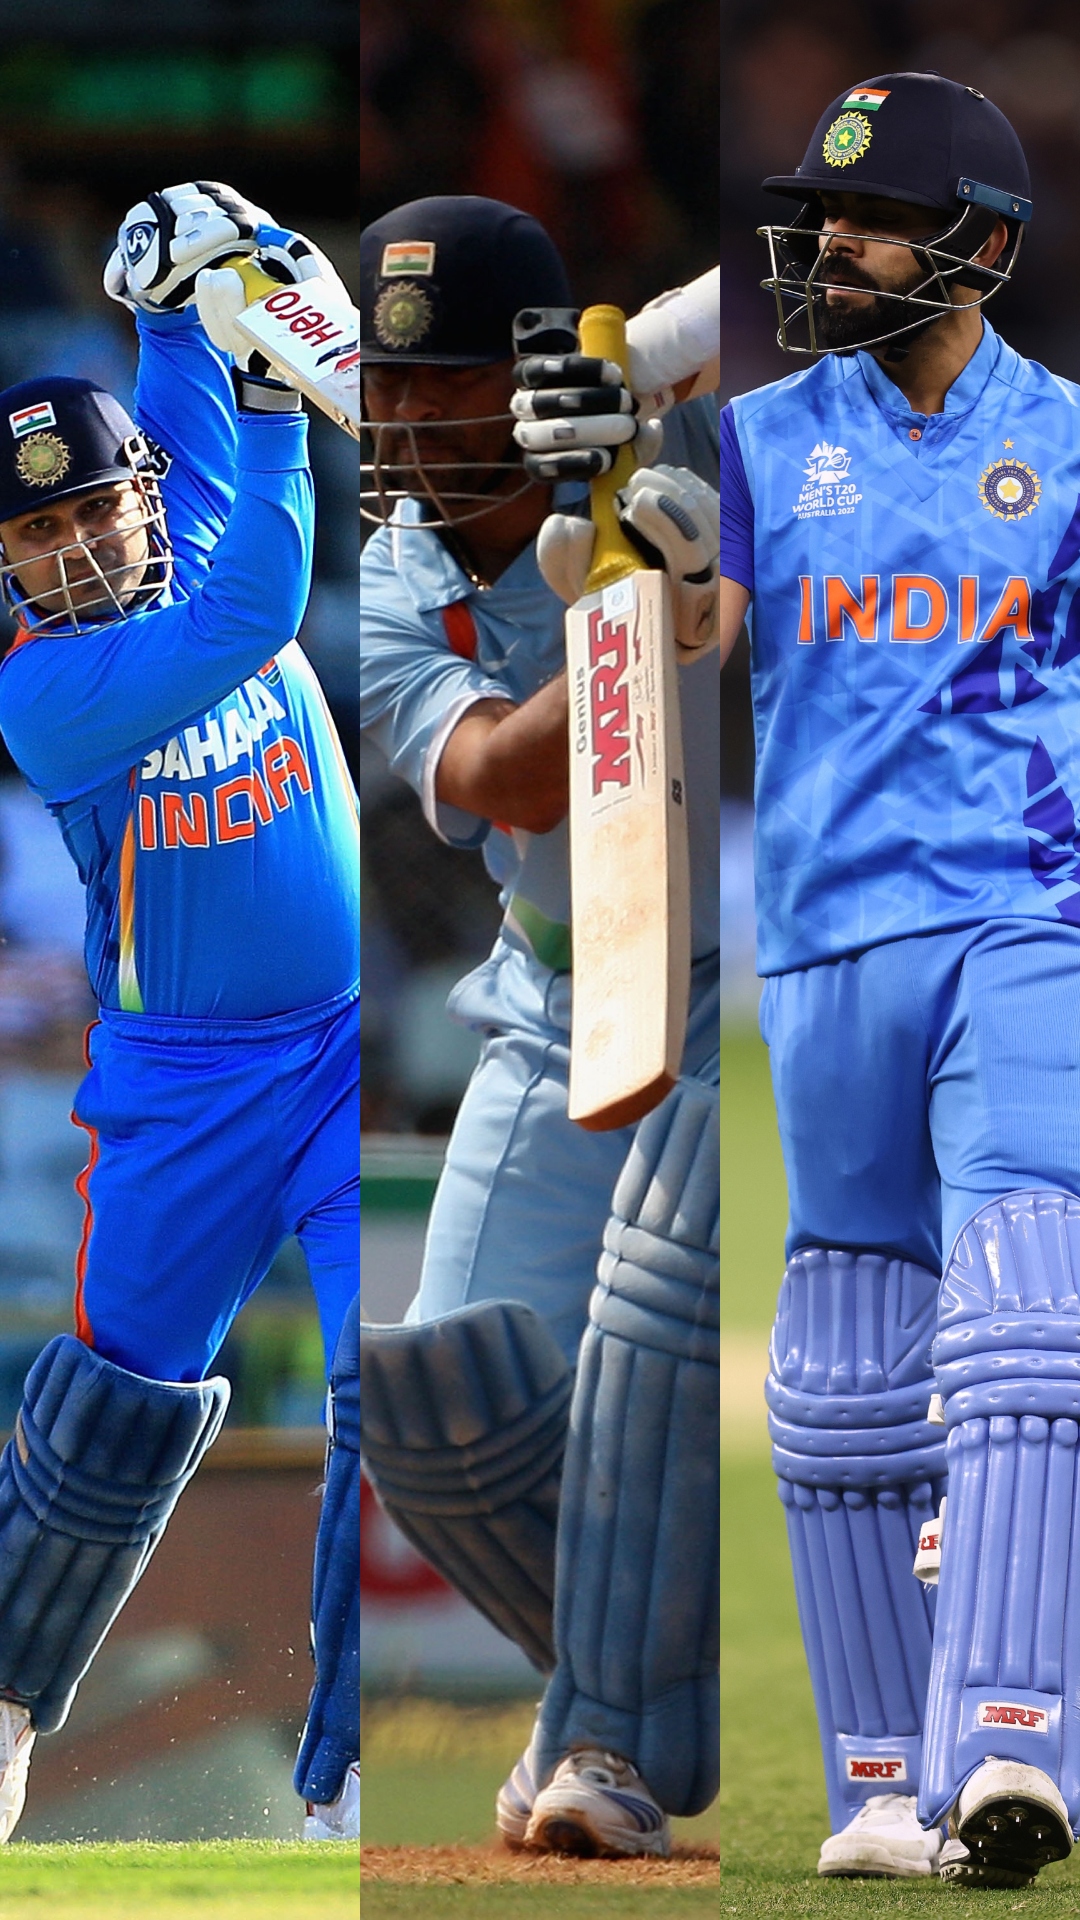 IND vs NZ 1st ODI: From Virat Kohli to Sachin Tendulkar, here is the list of players with most ODI runs against New Zealand